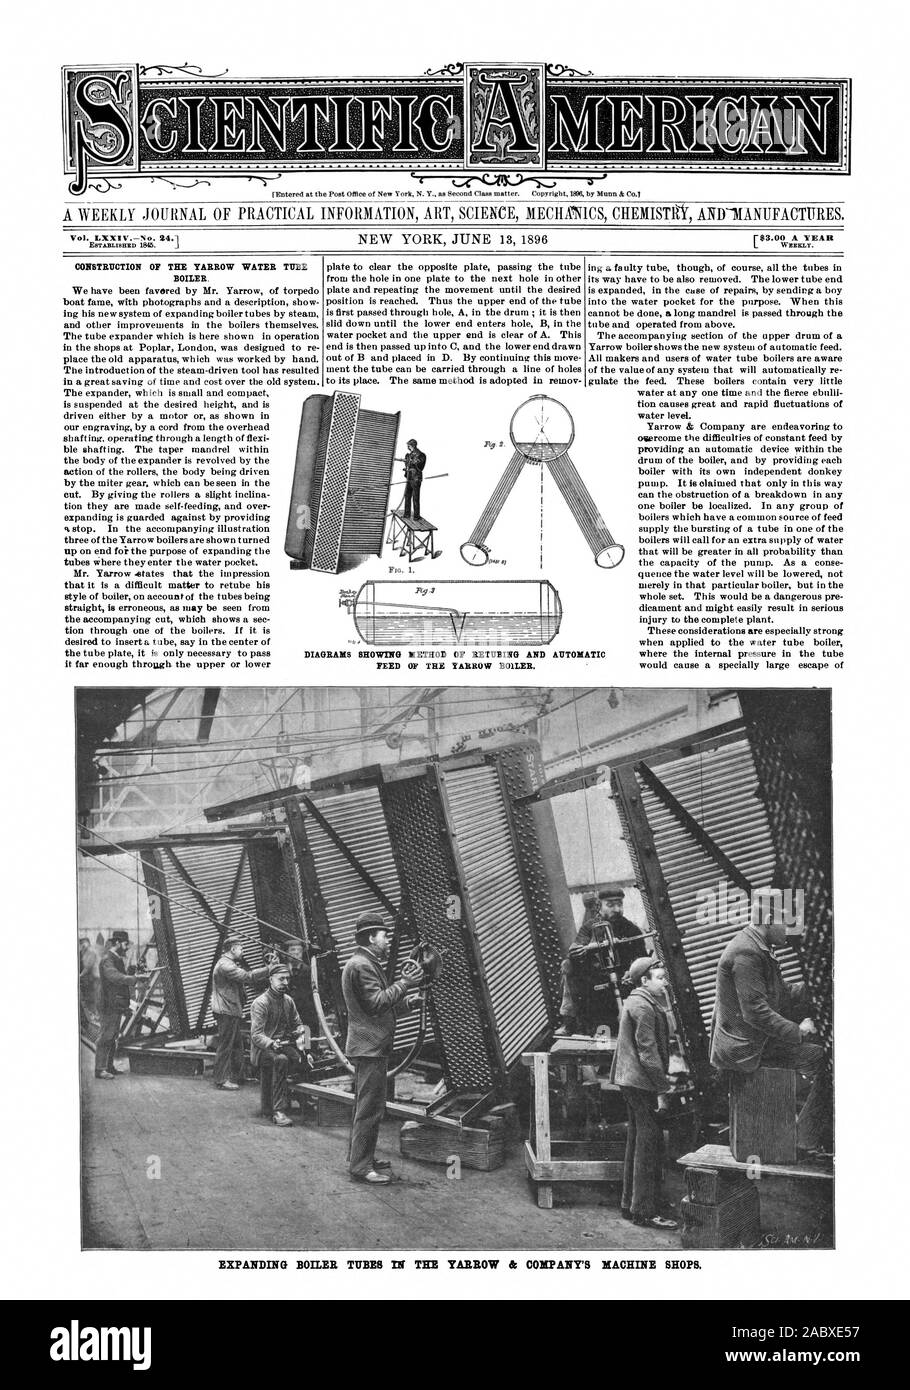 Vol. LXXI V No. 24.3 WEEKLY. CONSTRUCTION OF THE YARROW WATER TUBE BOILER DIAGRAMS SHOWING METHOD OF RETIMING AND AUTOMATIC FEED OF THE YARROW BOILER. EXPANDING BOILER TUBES IN THE YARROW & COMPANY'S MACHINE SHOPS., scientific american, 1896-06-13 Stock Photo